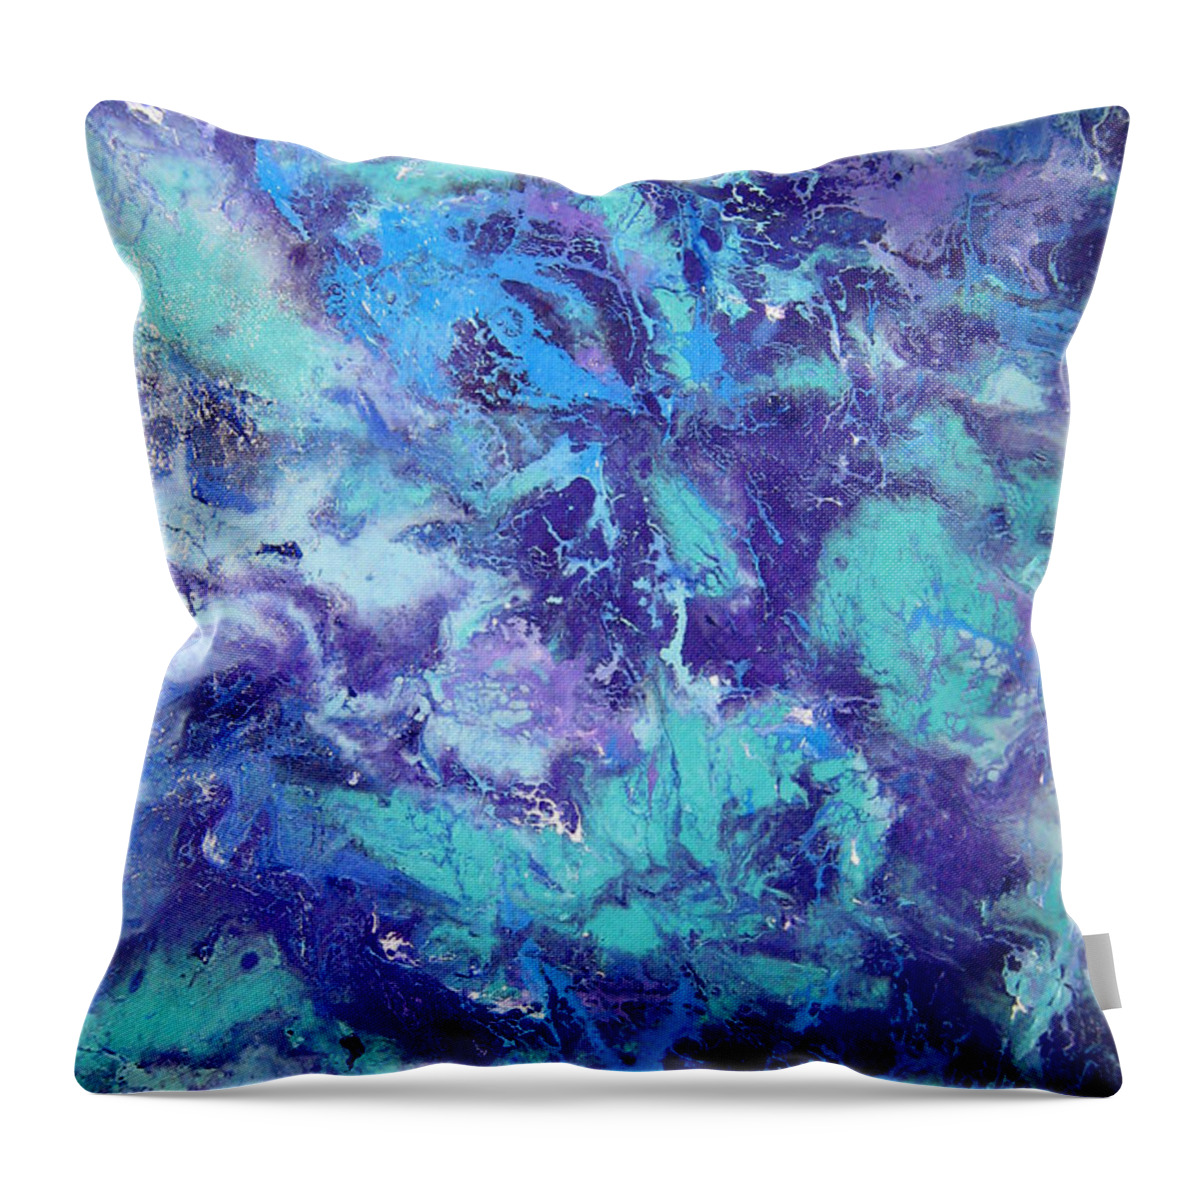 Resin Art Throw Pillow featuring the painting Dream Weaver II by Jane Biven